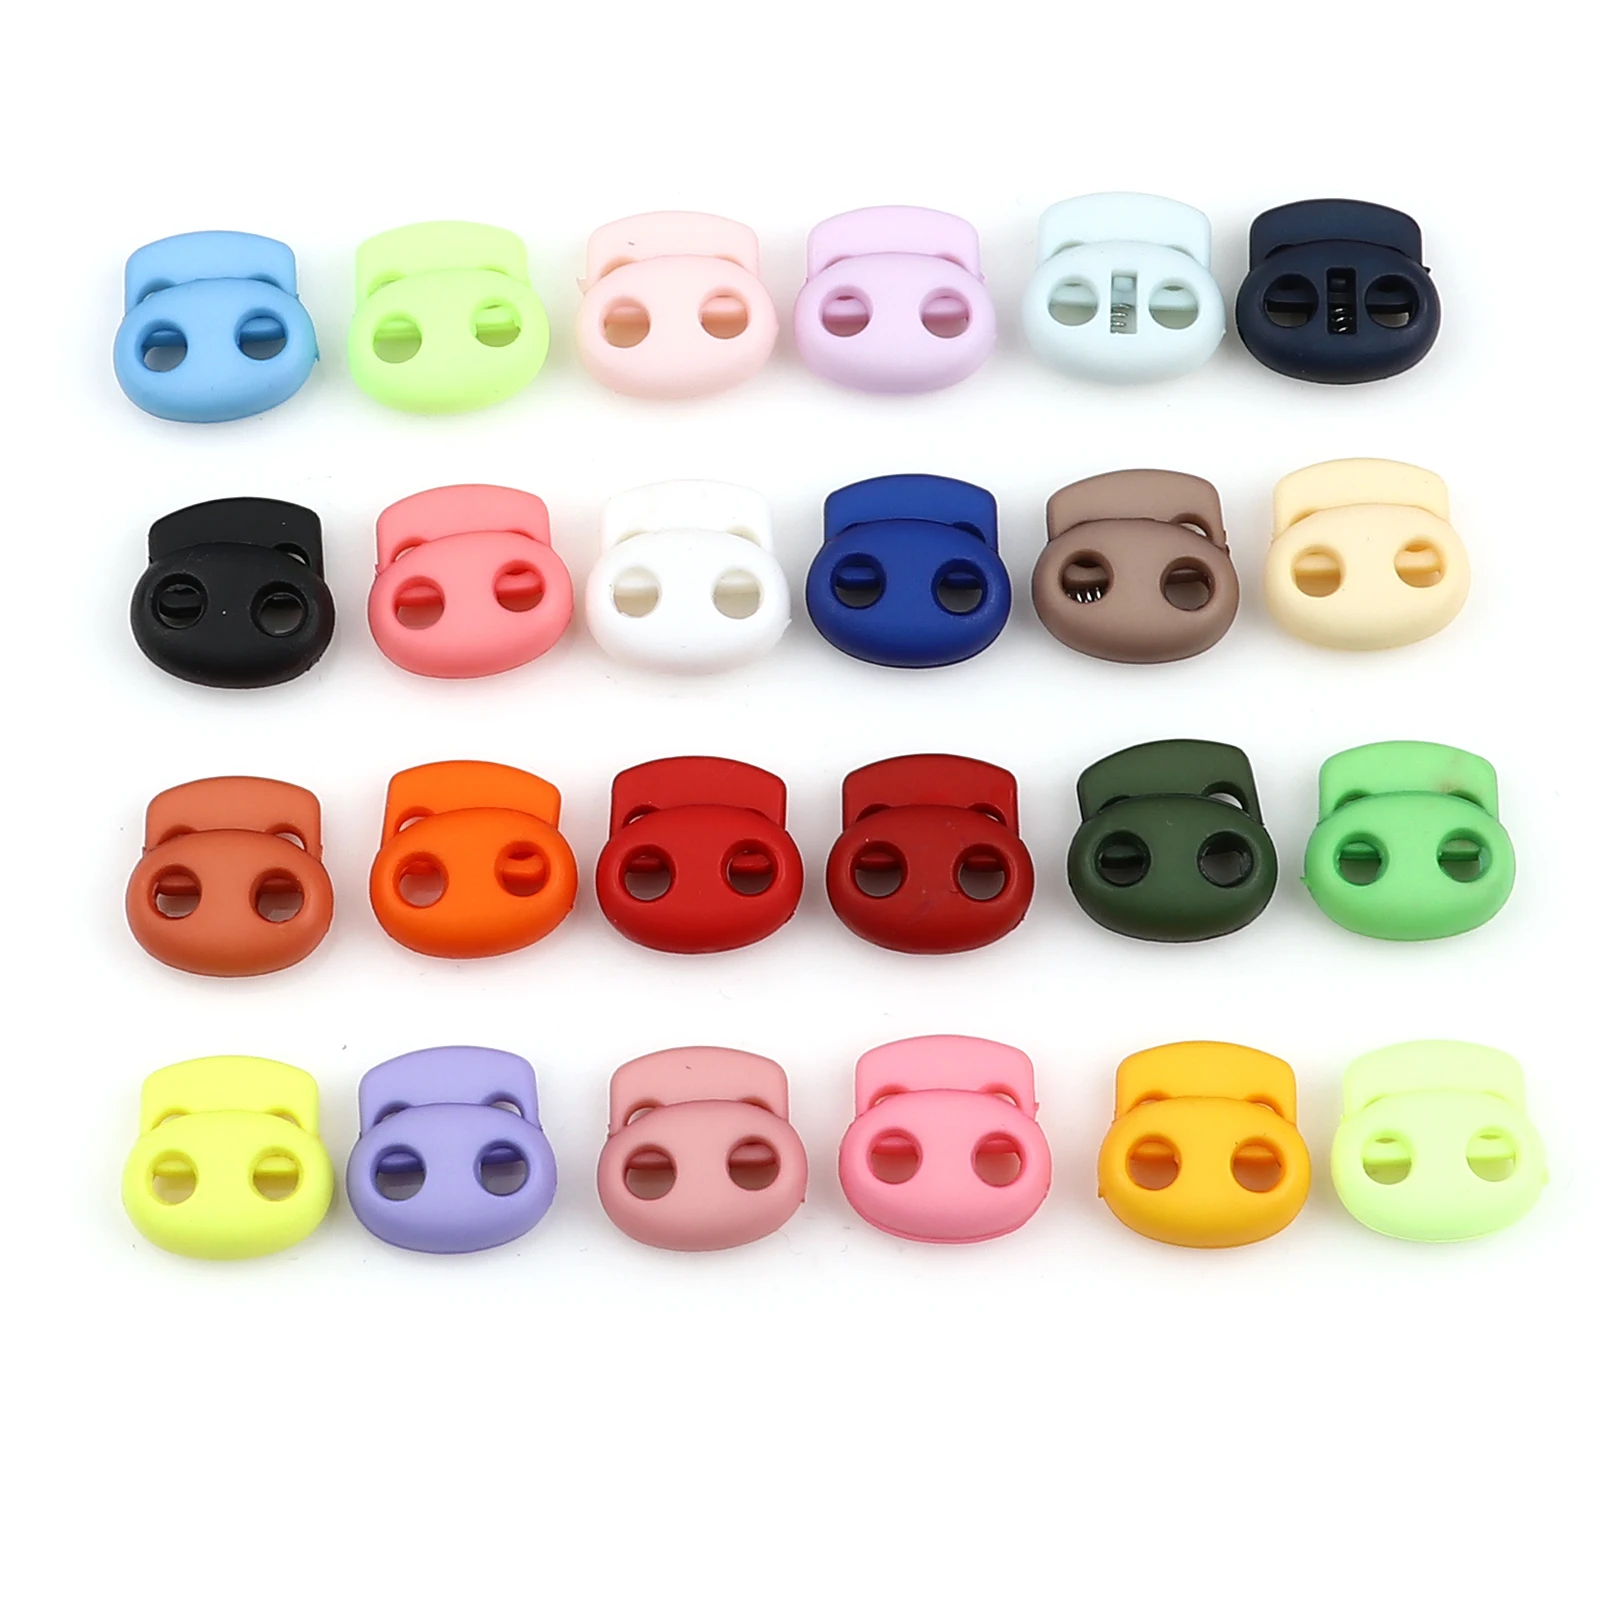 

Colorful 2cm Bean Toggle Clip Stopper Plastic Paracord Cord Lock Clamp Shoelace Cord Buckles Cords Lanyard Part Sportswear 10Pcs